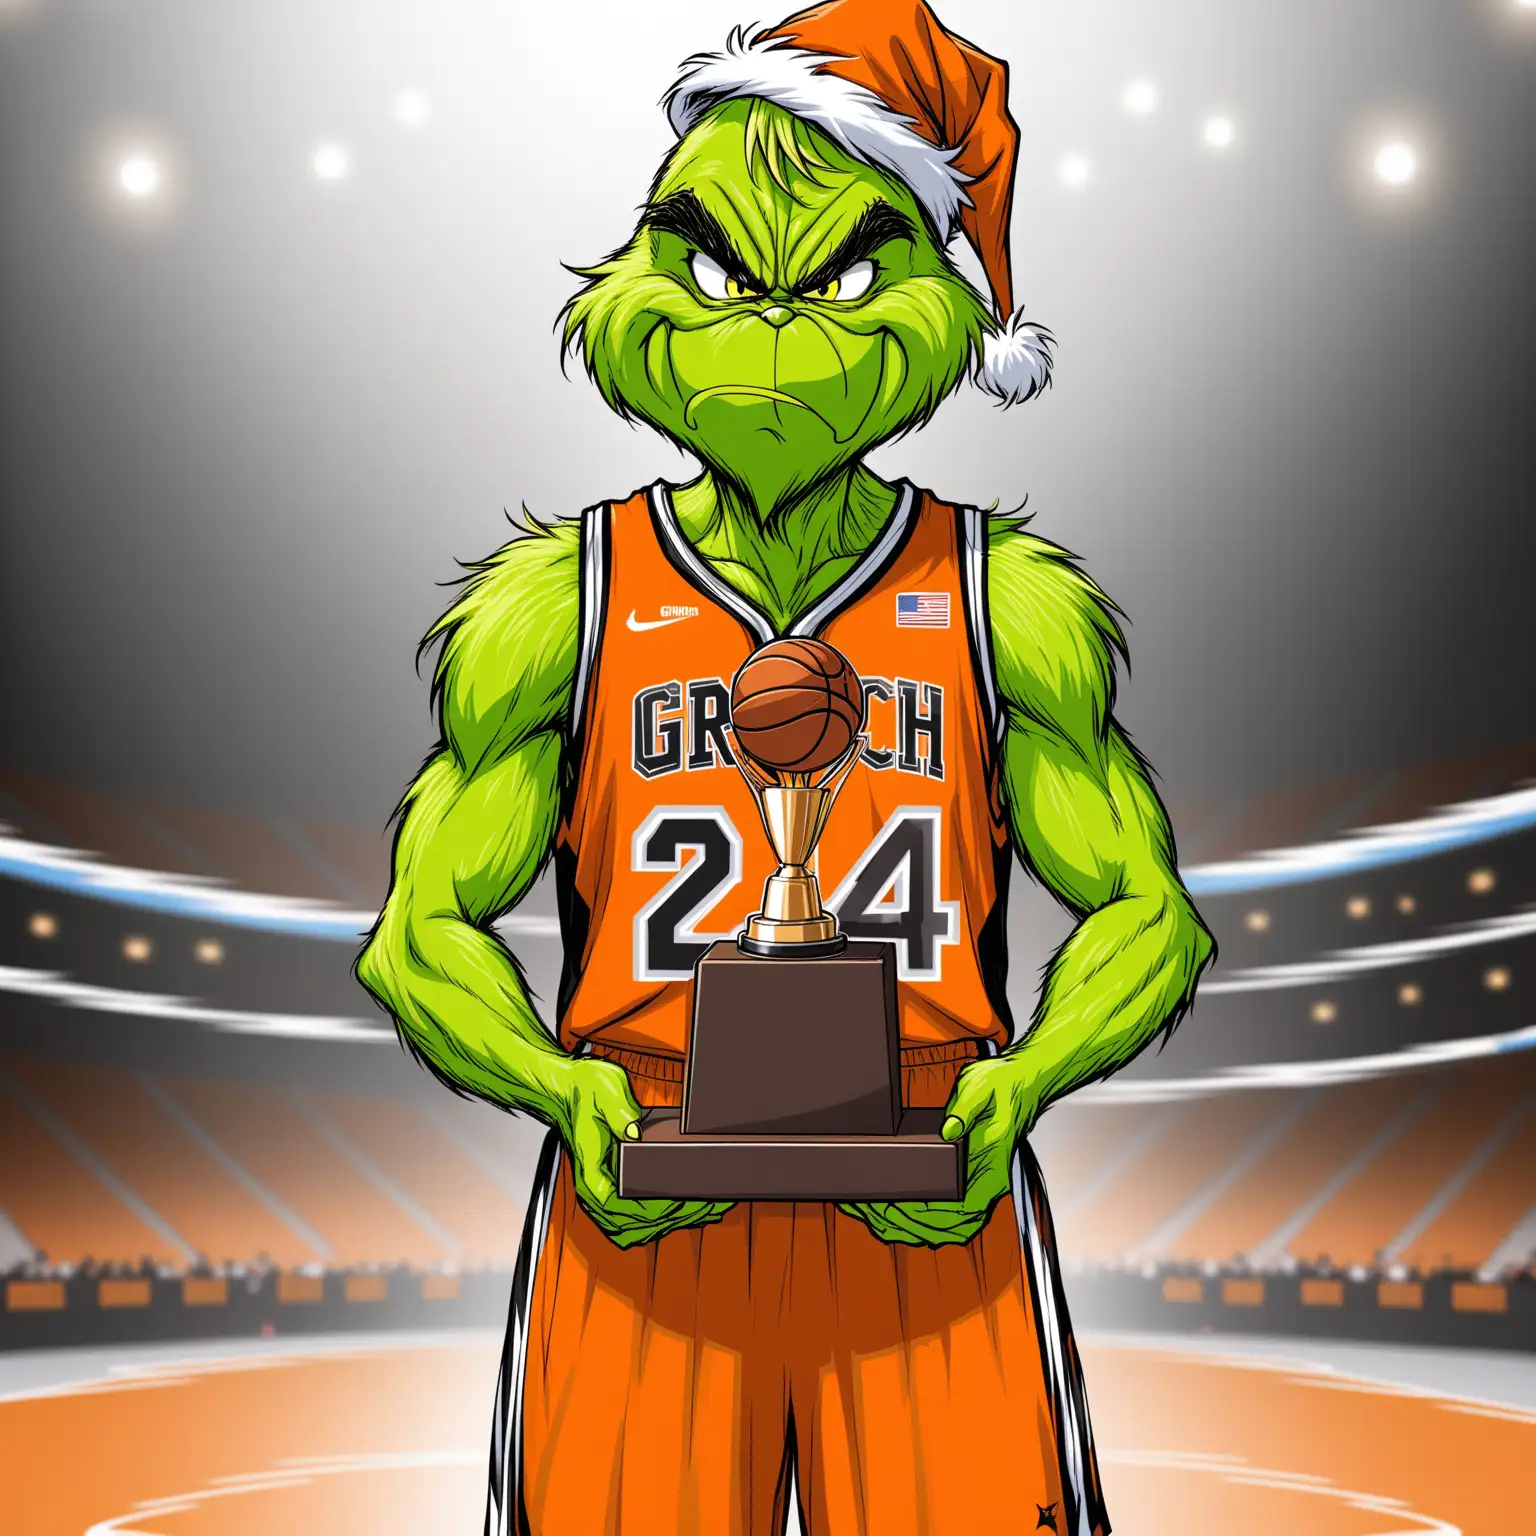 Grinch wearing orange and black basketball uniform and holding a championship trophy